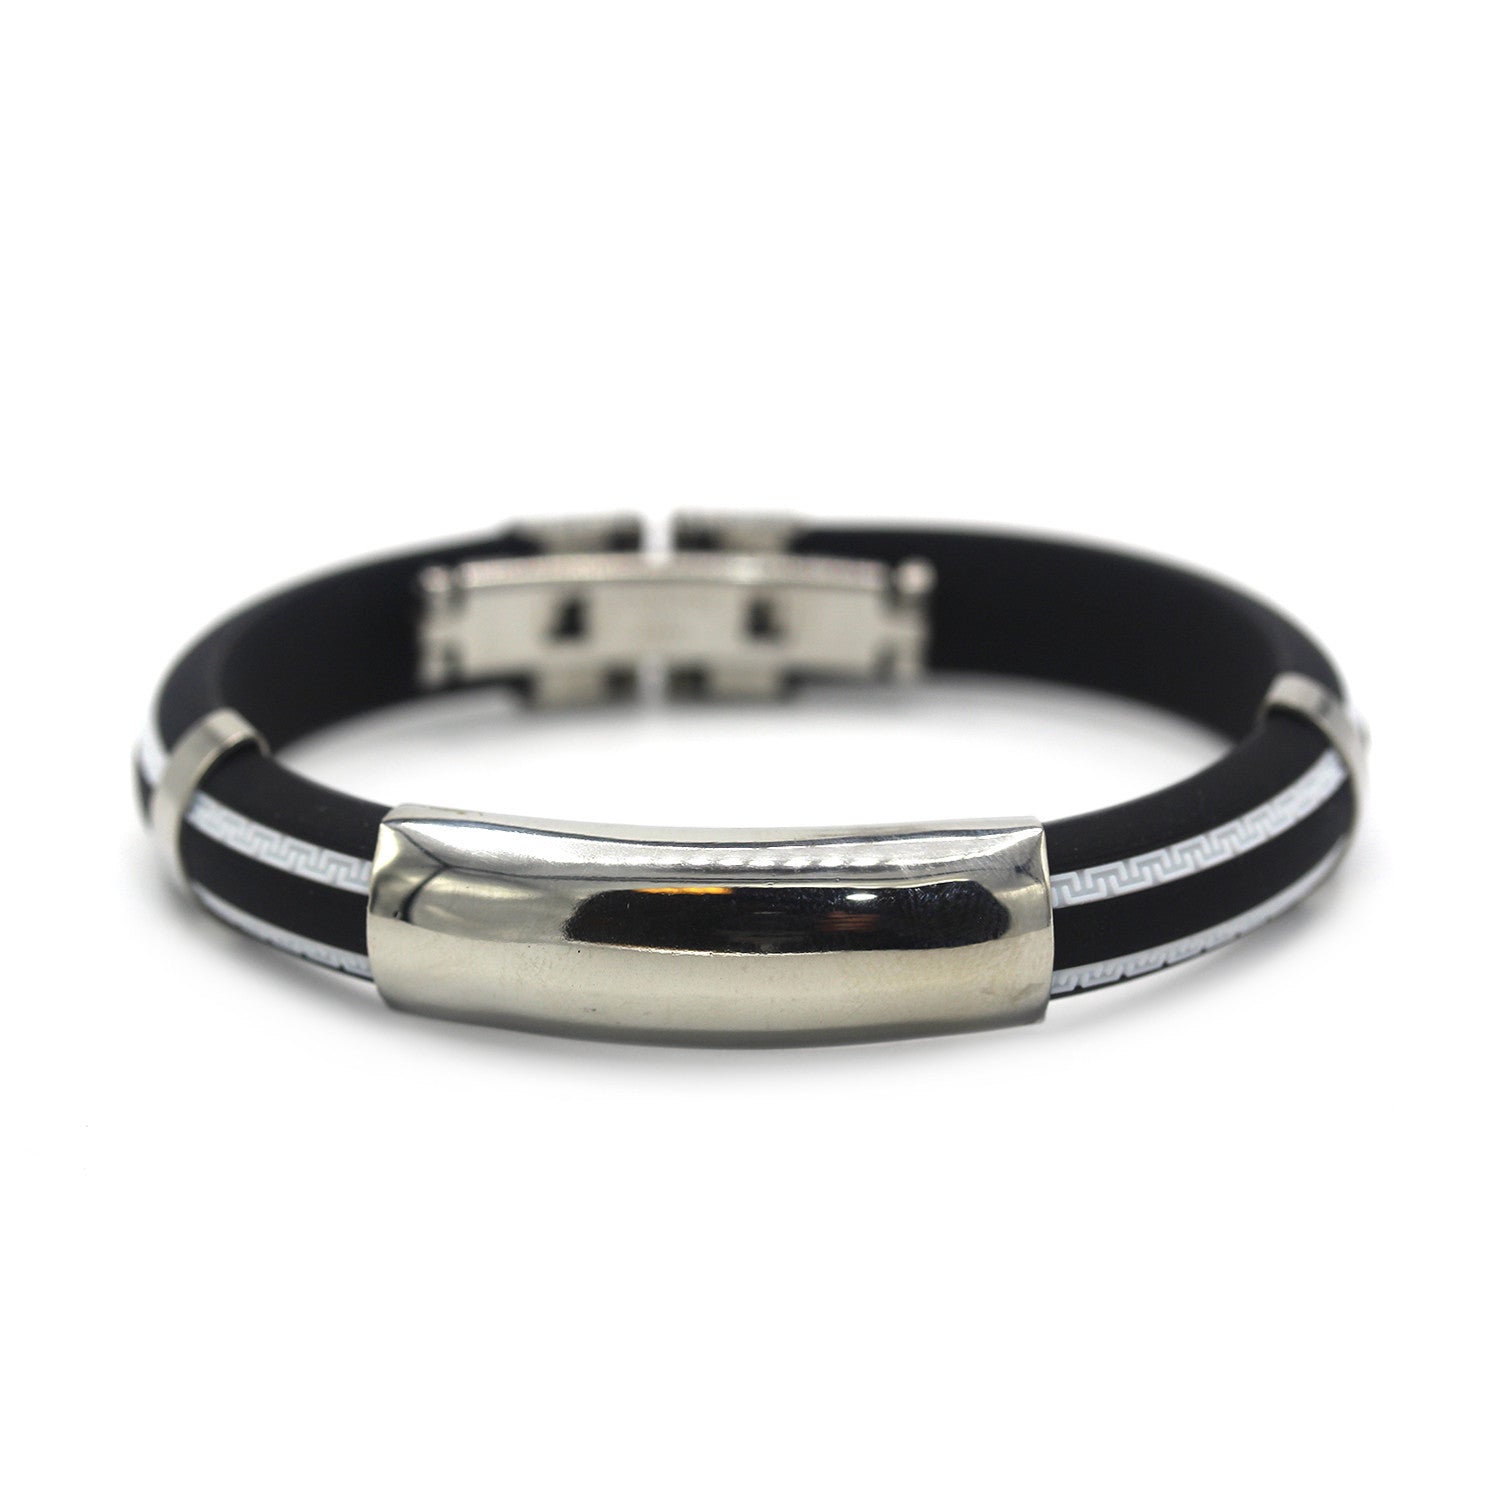 Designer Rubber Bracelet Stainless Steel Accents Dual Hinge Clasp (Silver)